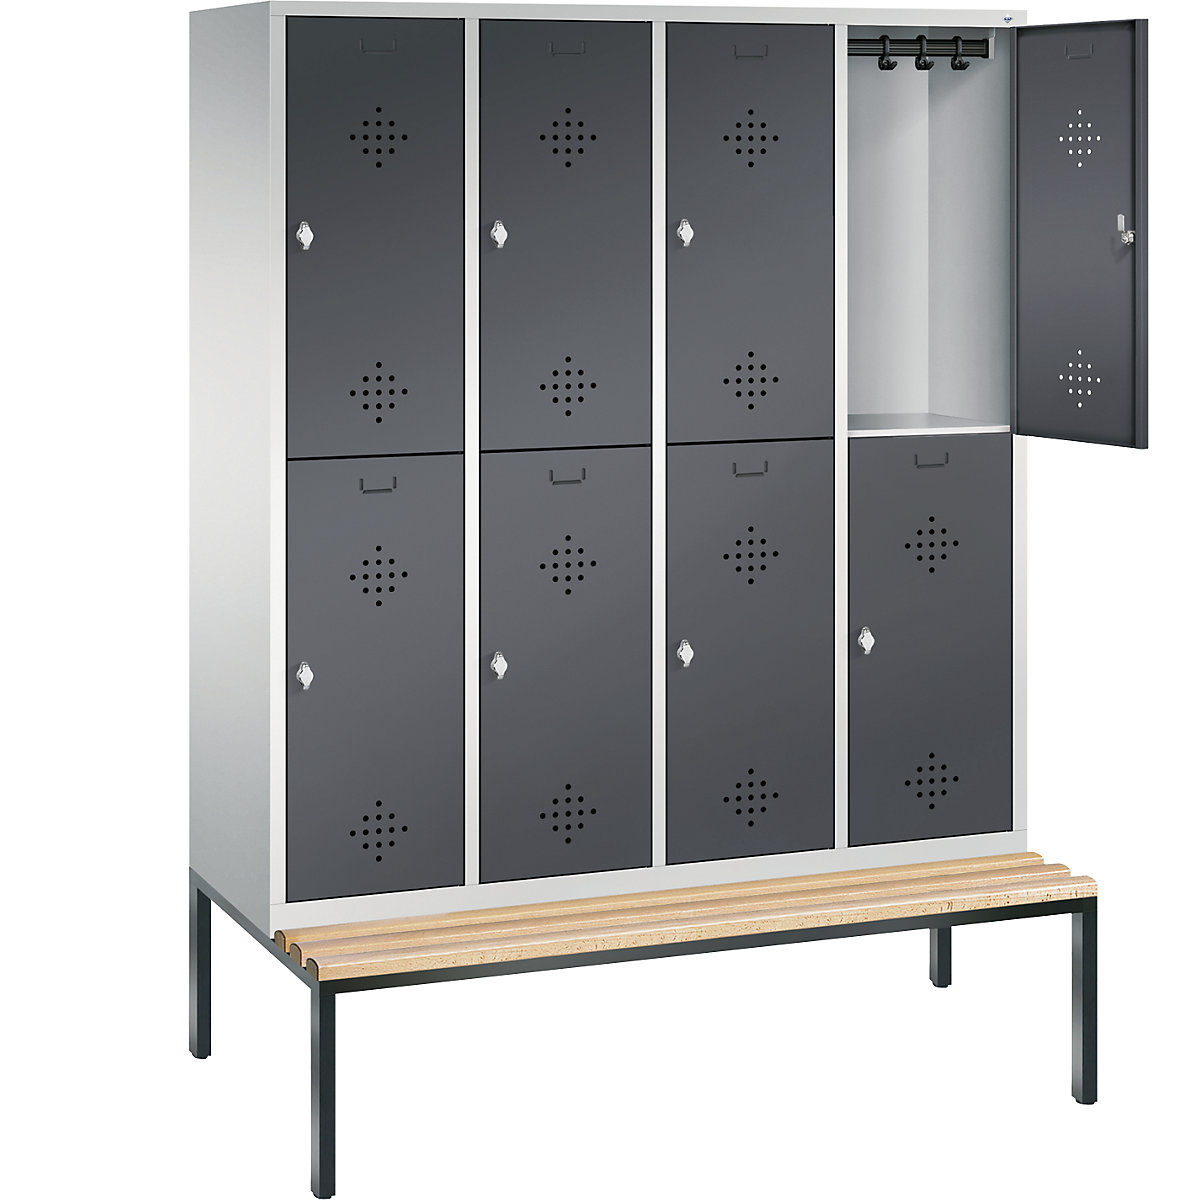 CLASSIC cloakroom locker with bench mounted underneath, double tier – C+P:  4 compartments, 2 shelf compartments each, compartment width 400 mm |  kaiserkraft